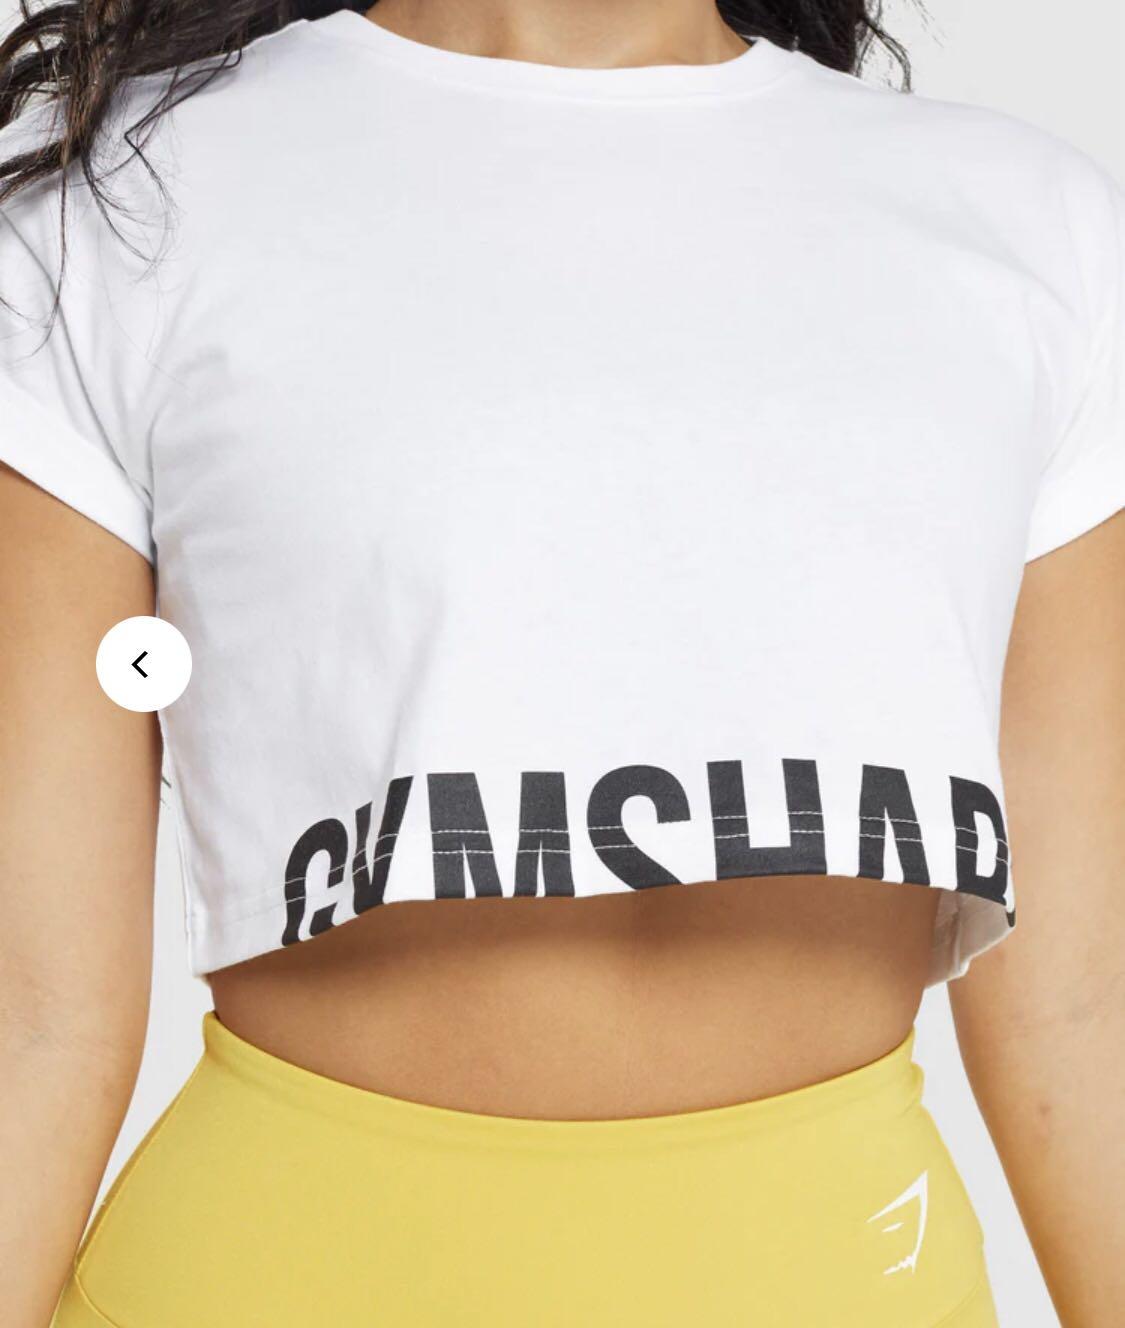 GYMSHARK Fraction Crop Top in White - size M, Women's Fashion, Activewear  on Carousell